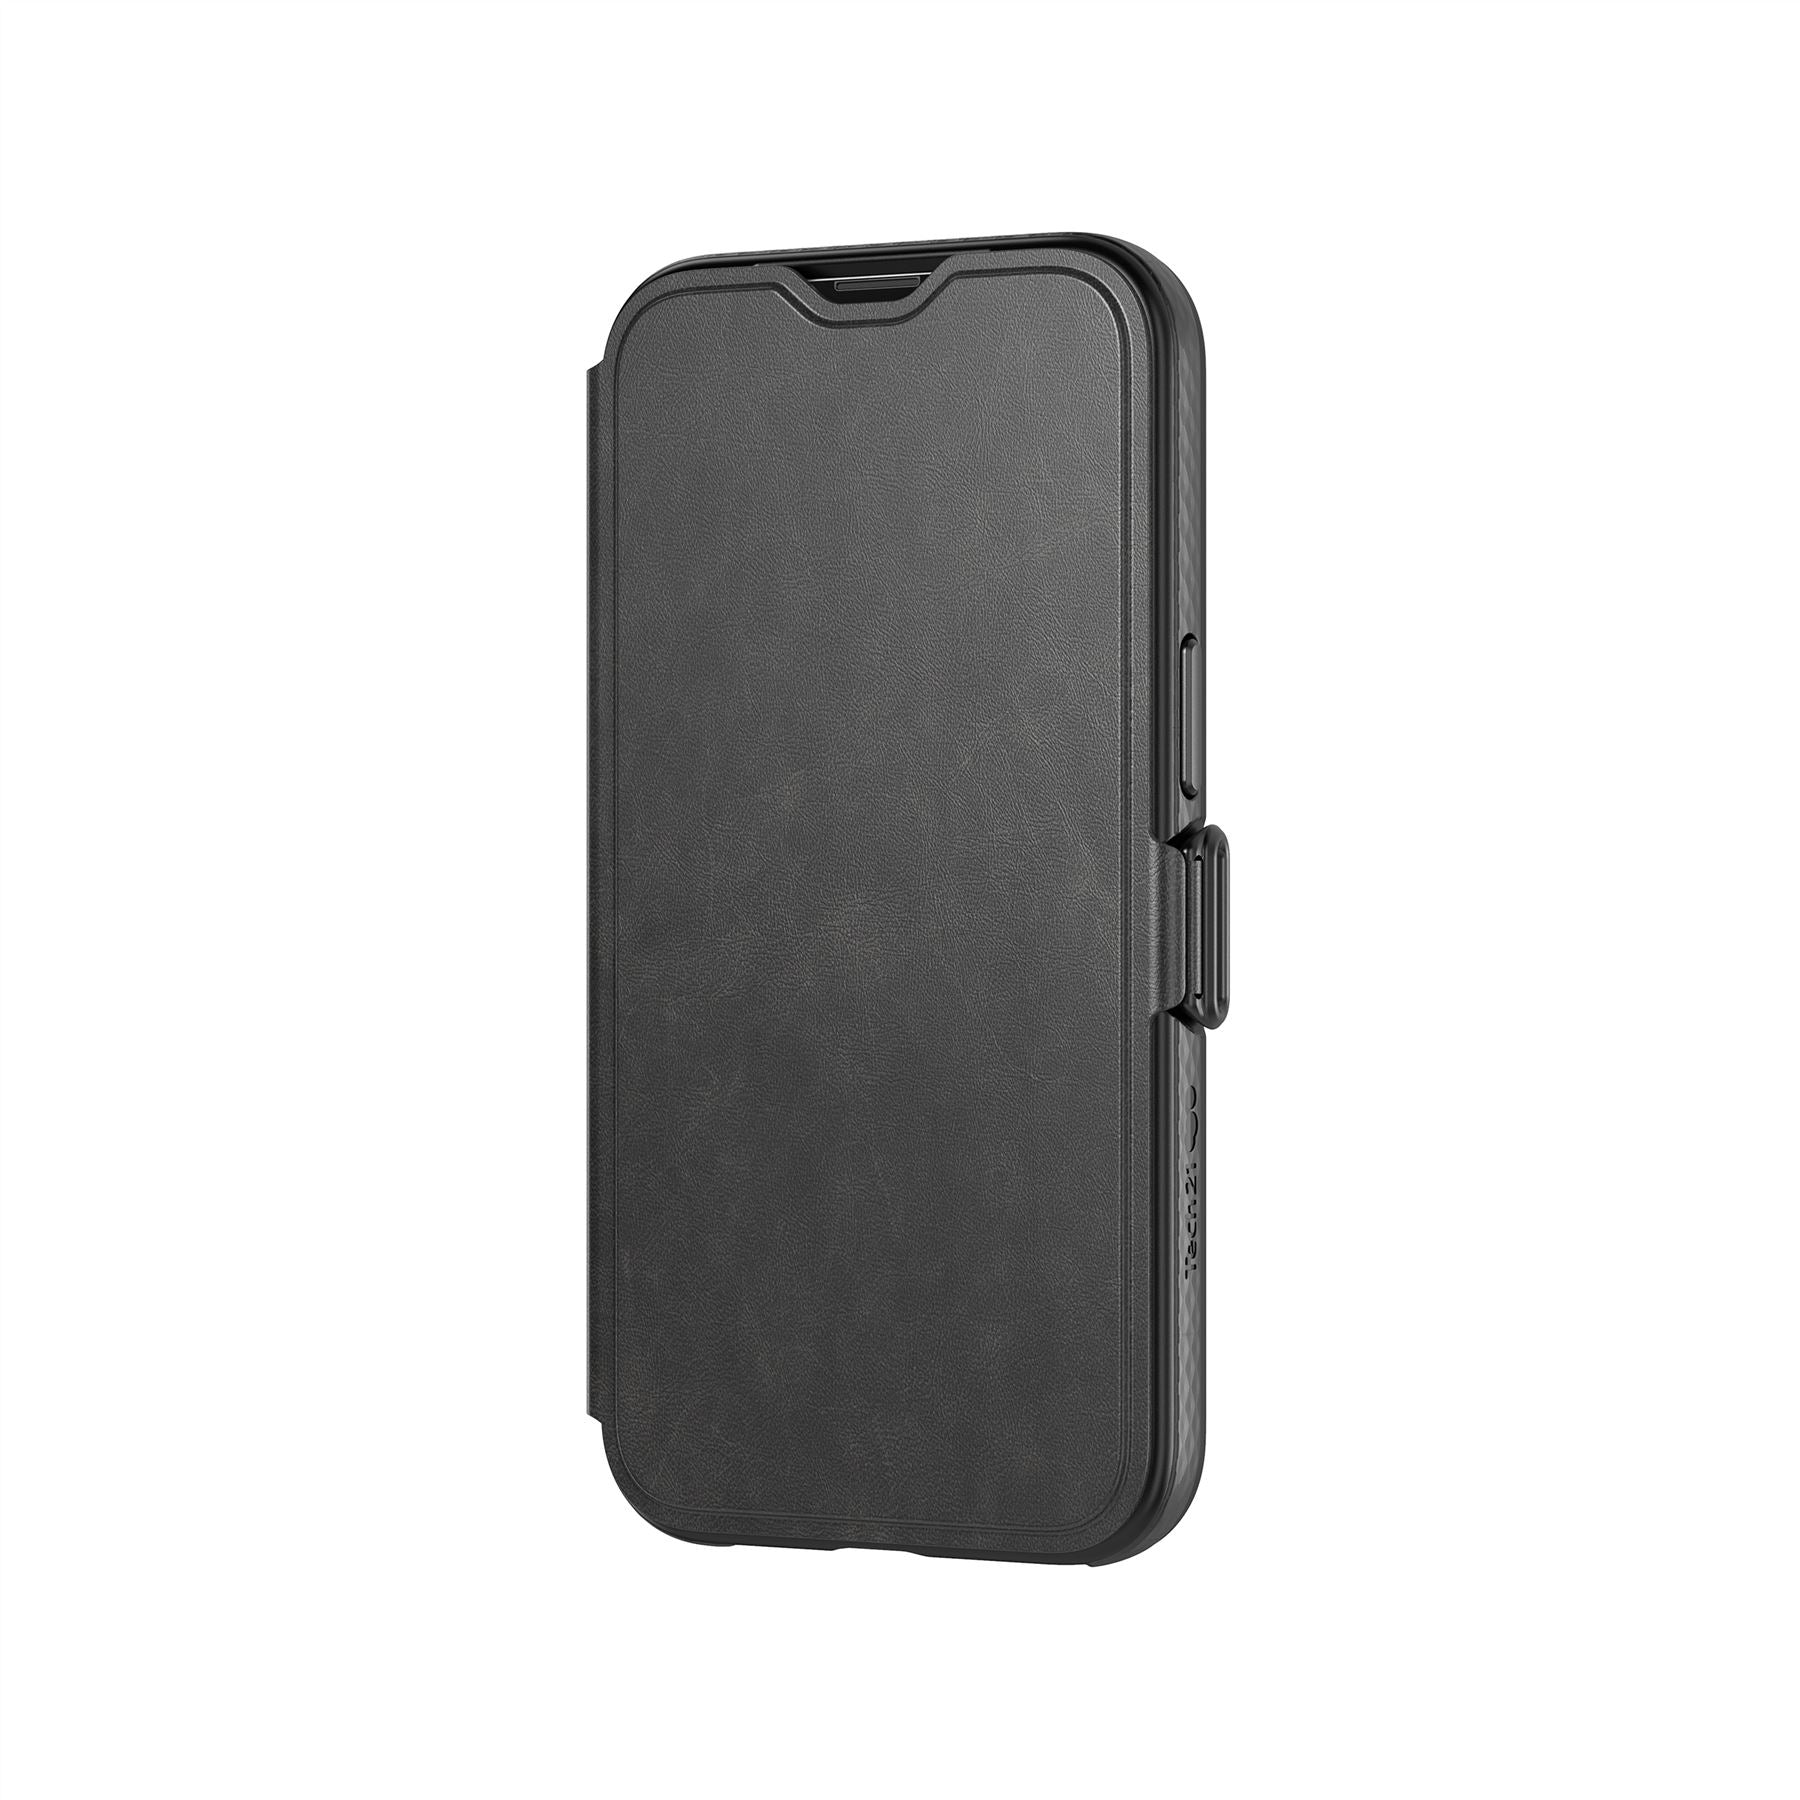 Vegan Leather Case With Flip Card For iPhone 13 - Black , iPhone 13 back cover, iPhone 13 case best